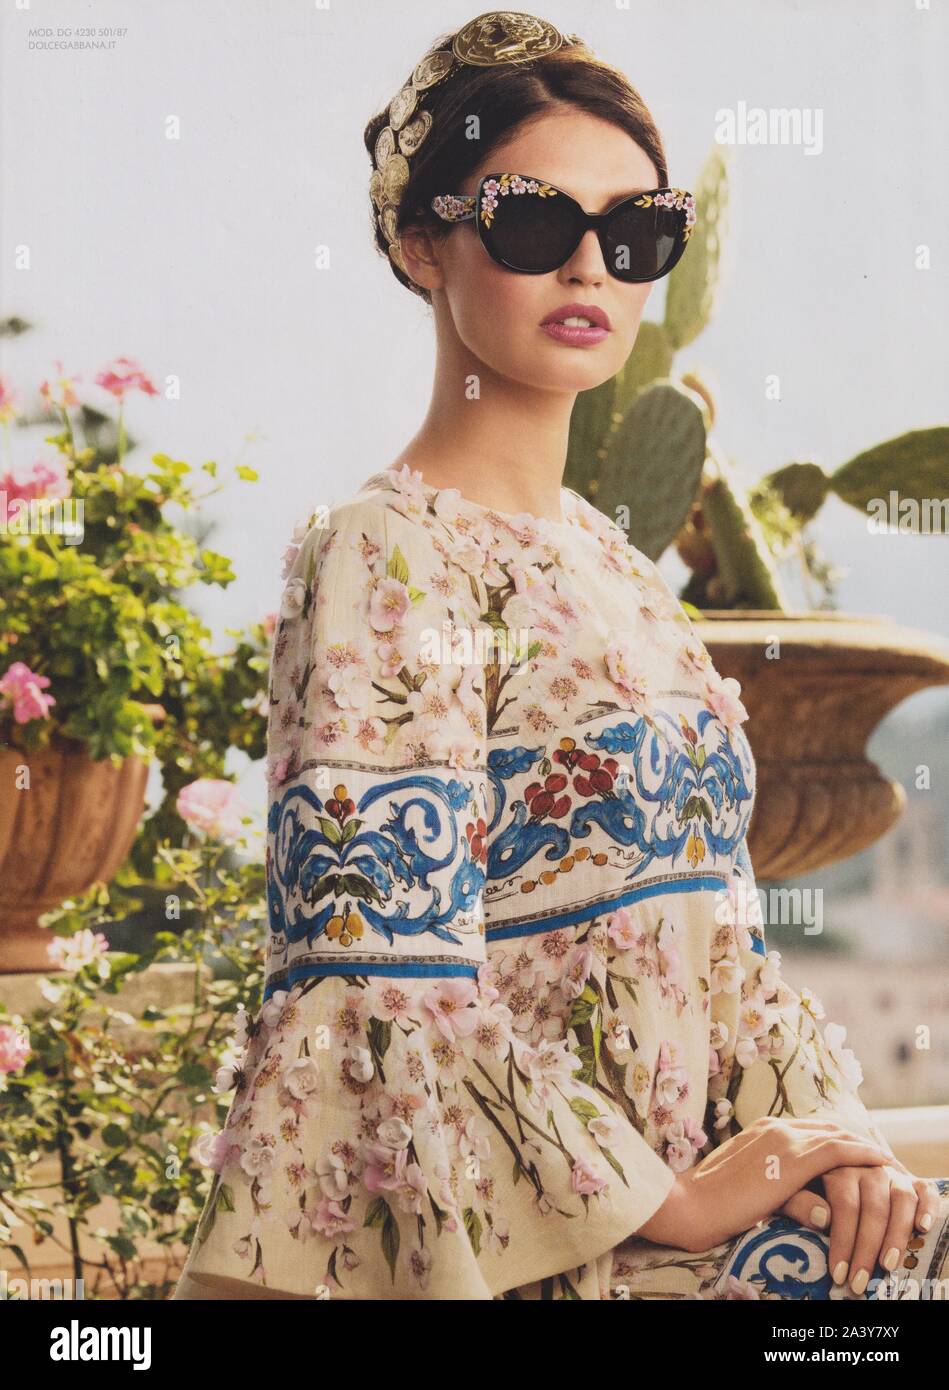 poster advertising Dolce & Gabbana fashion house with Bianca Balti in paper  magazine from 2014, advertisement, creative Dolce & Gabbana 2010s advert  Stock Photo - Alamy